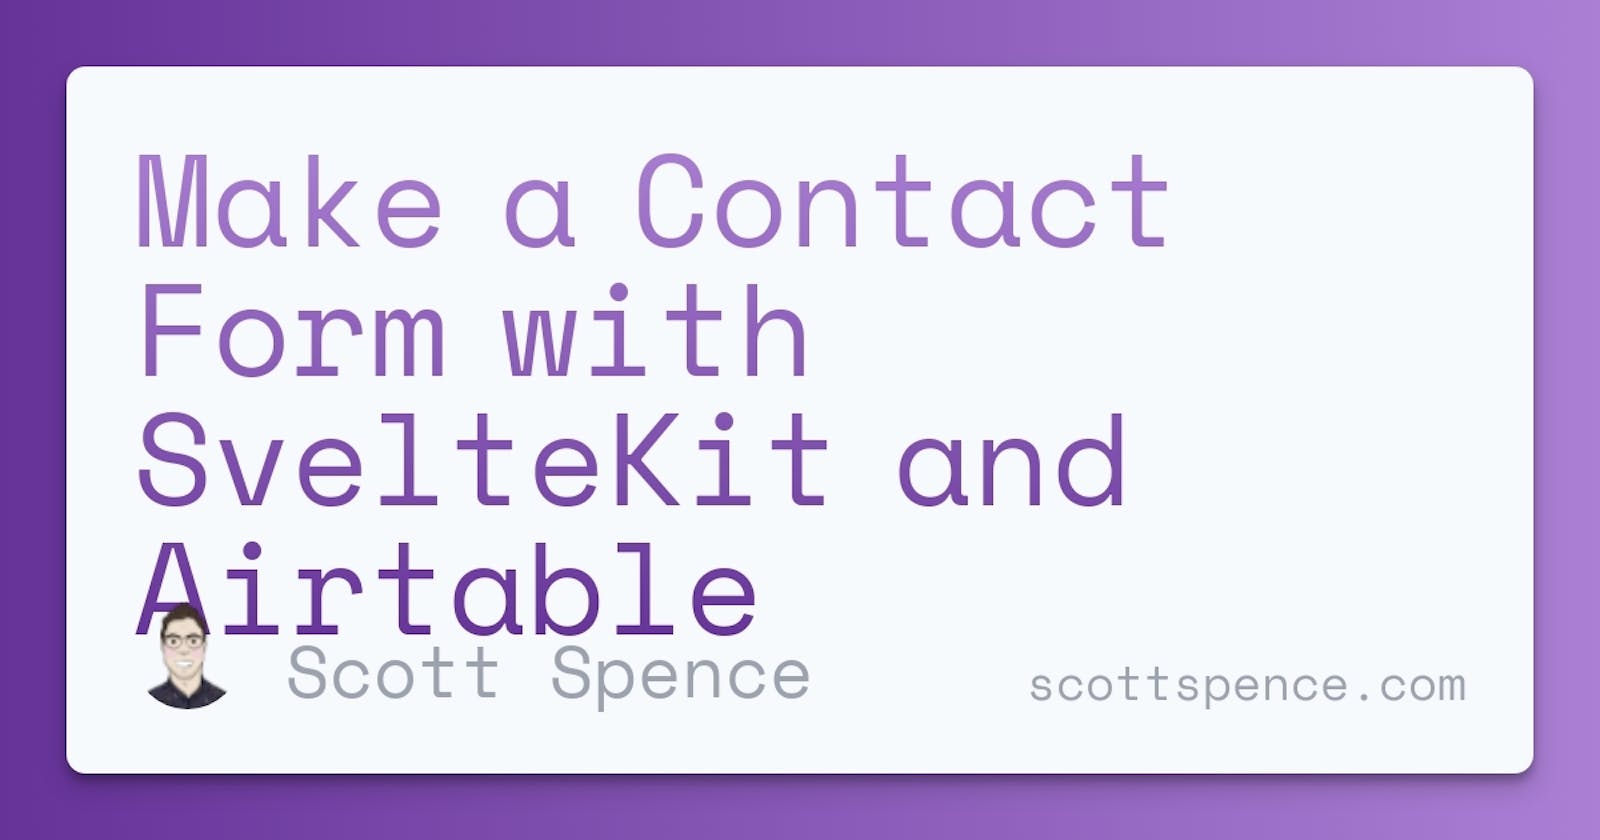 Make a Contact Form with SvelteKit and Airtable